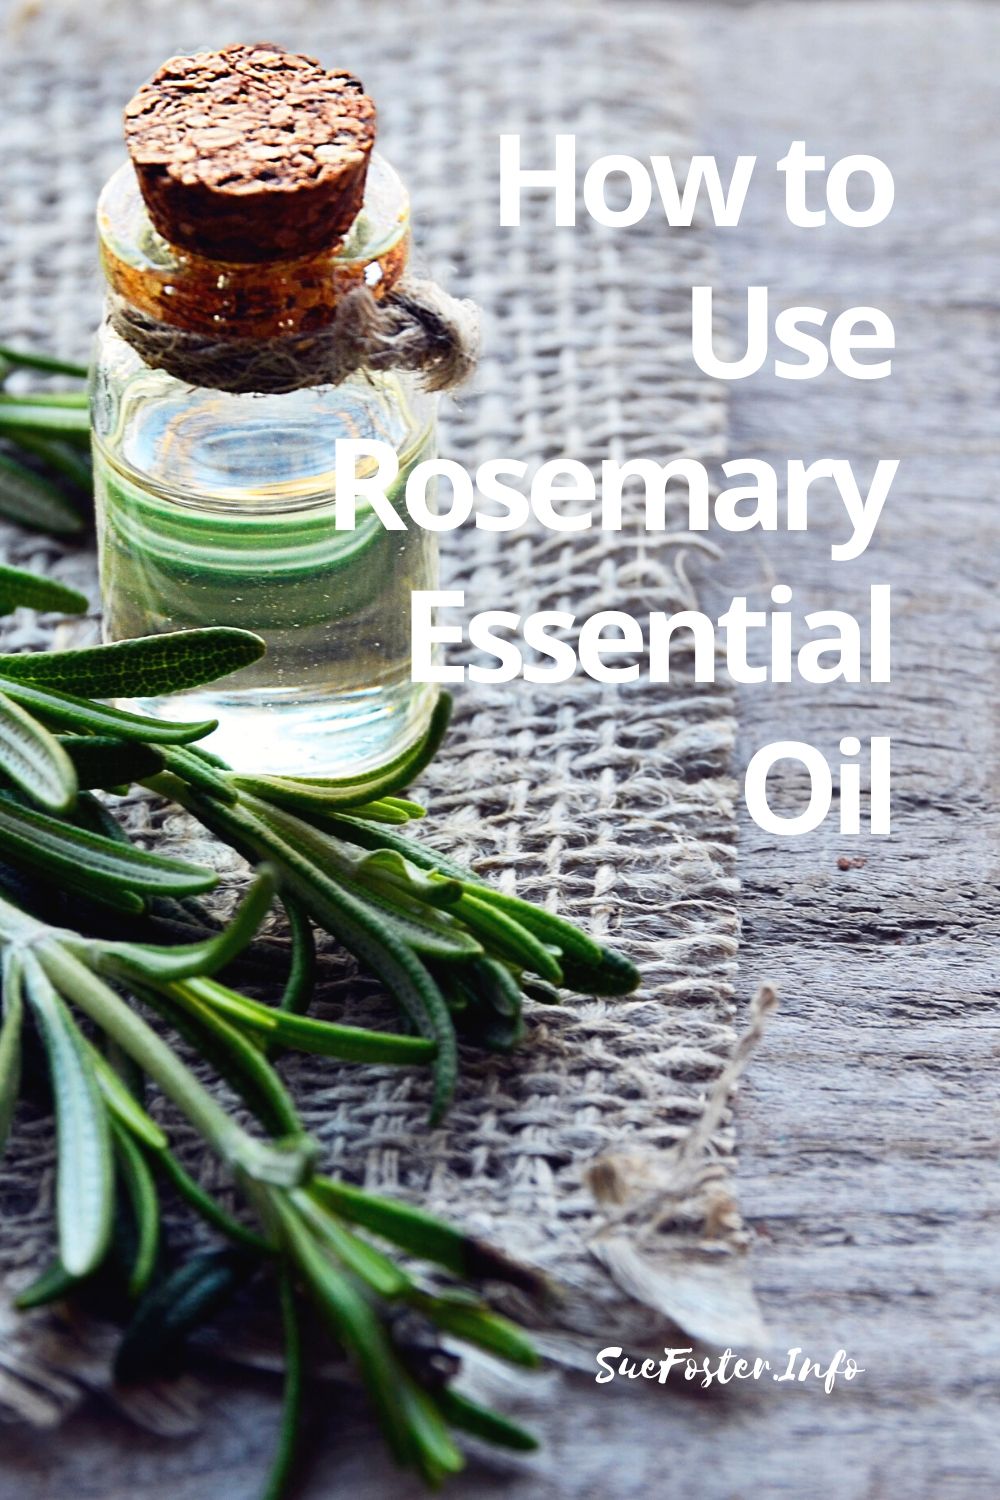 Rosemary essential oil is jampacked with a host of health benefits from cosmetic enhancements to mental stimulation.